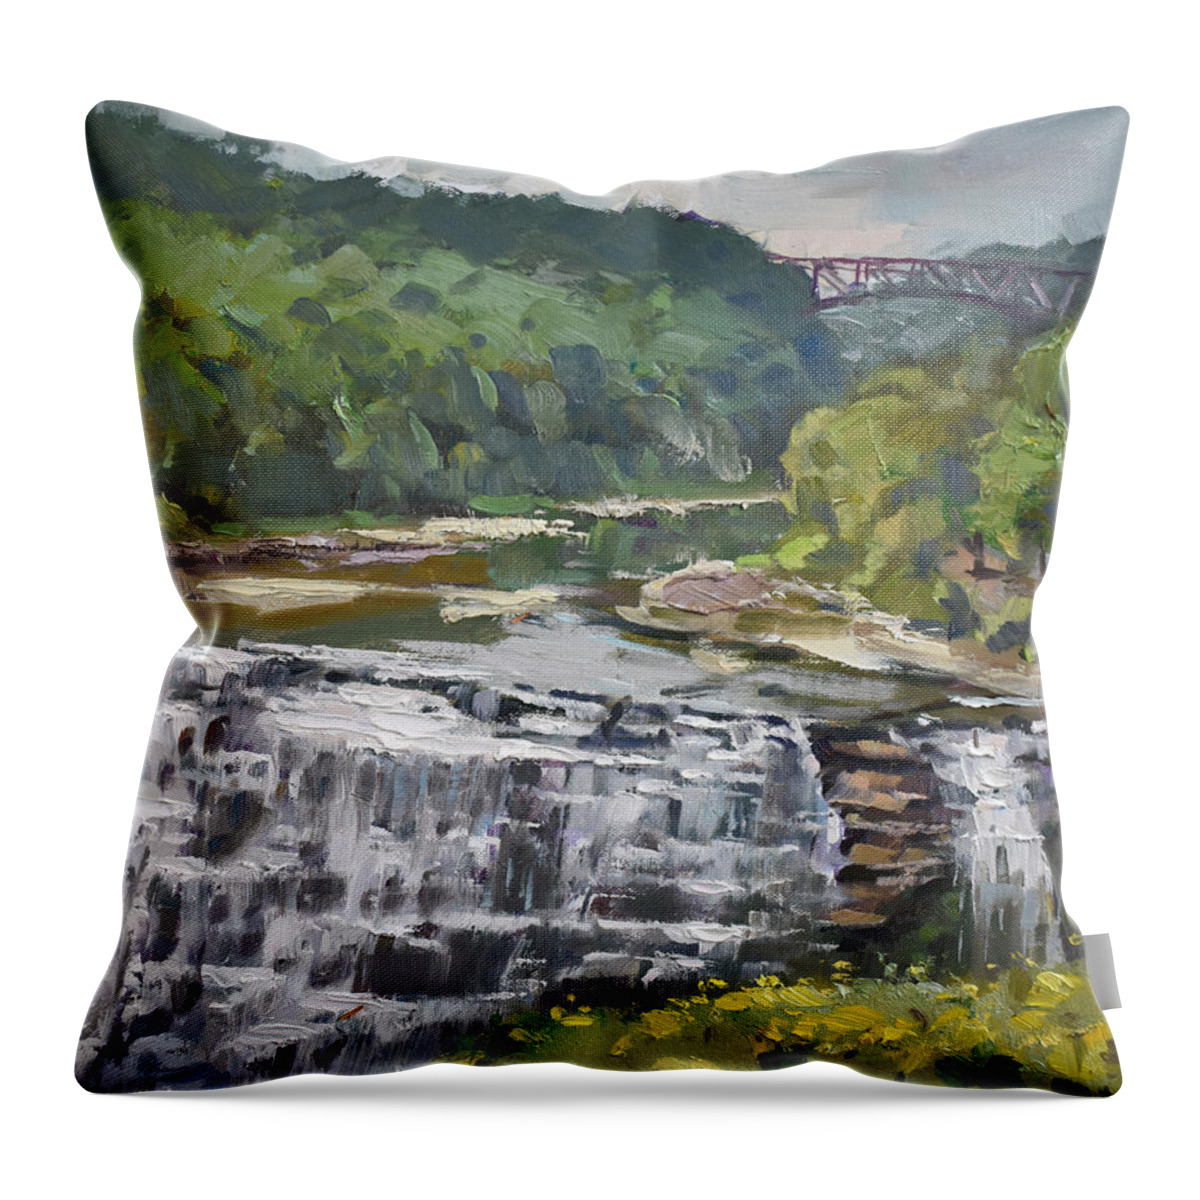 Letchworth Throw Pillow featuring the painting Letchworth State Park by Ylli Haruni